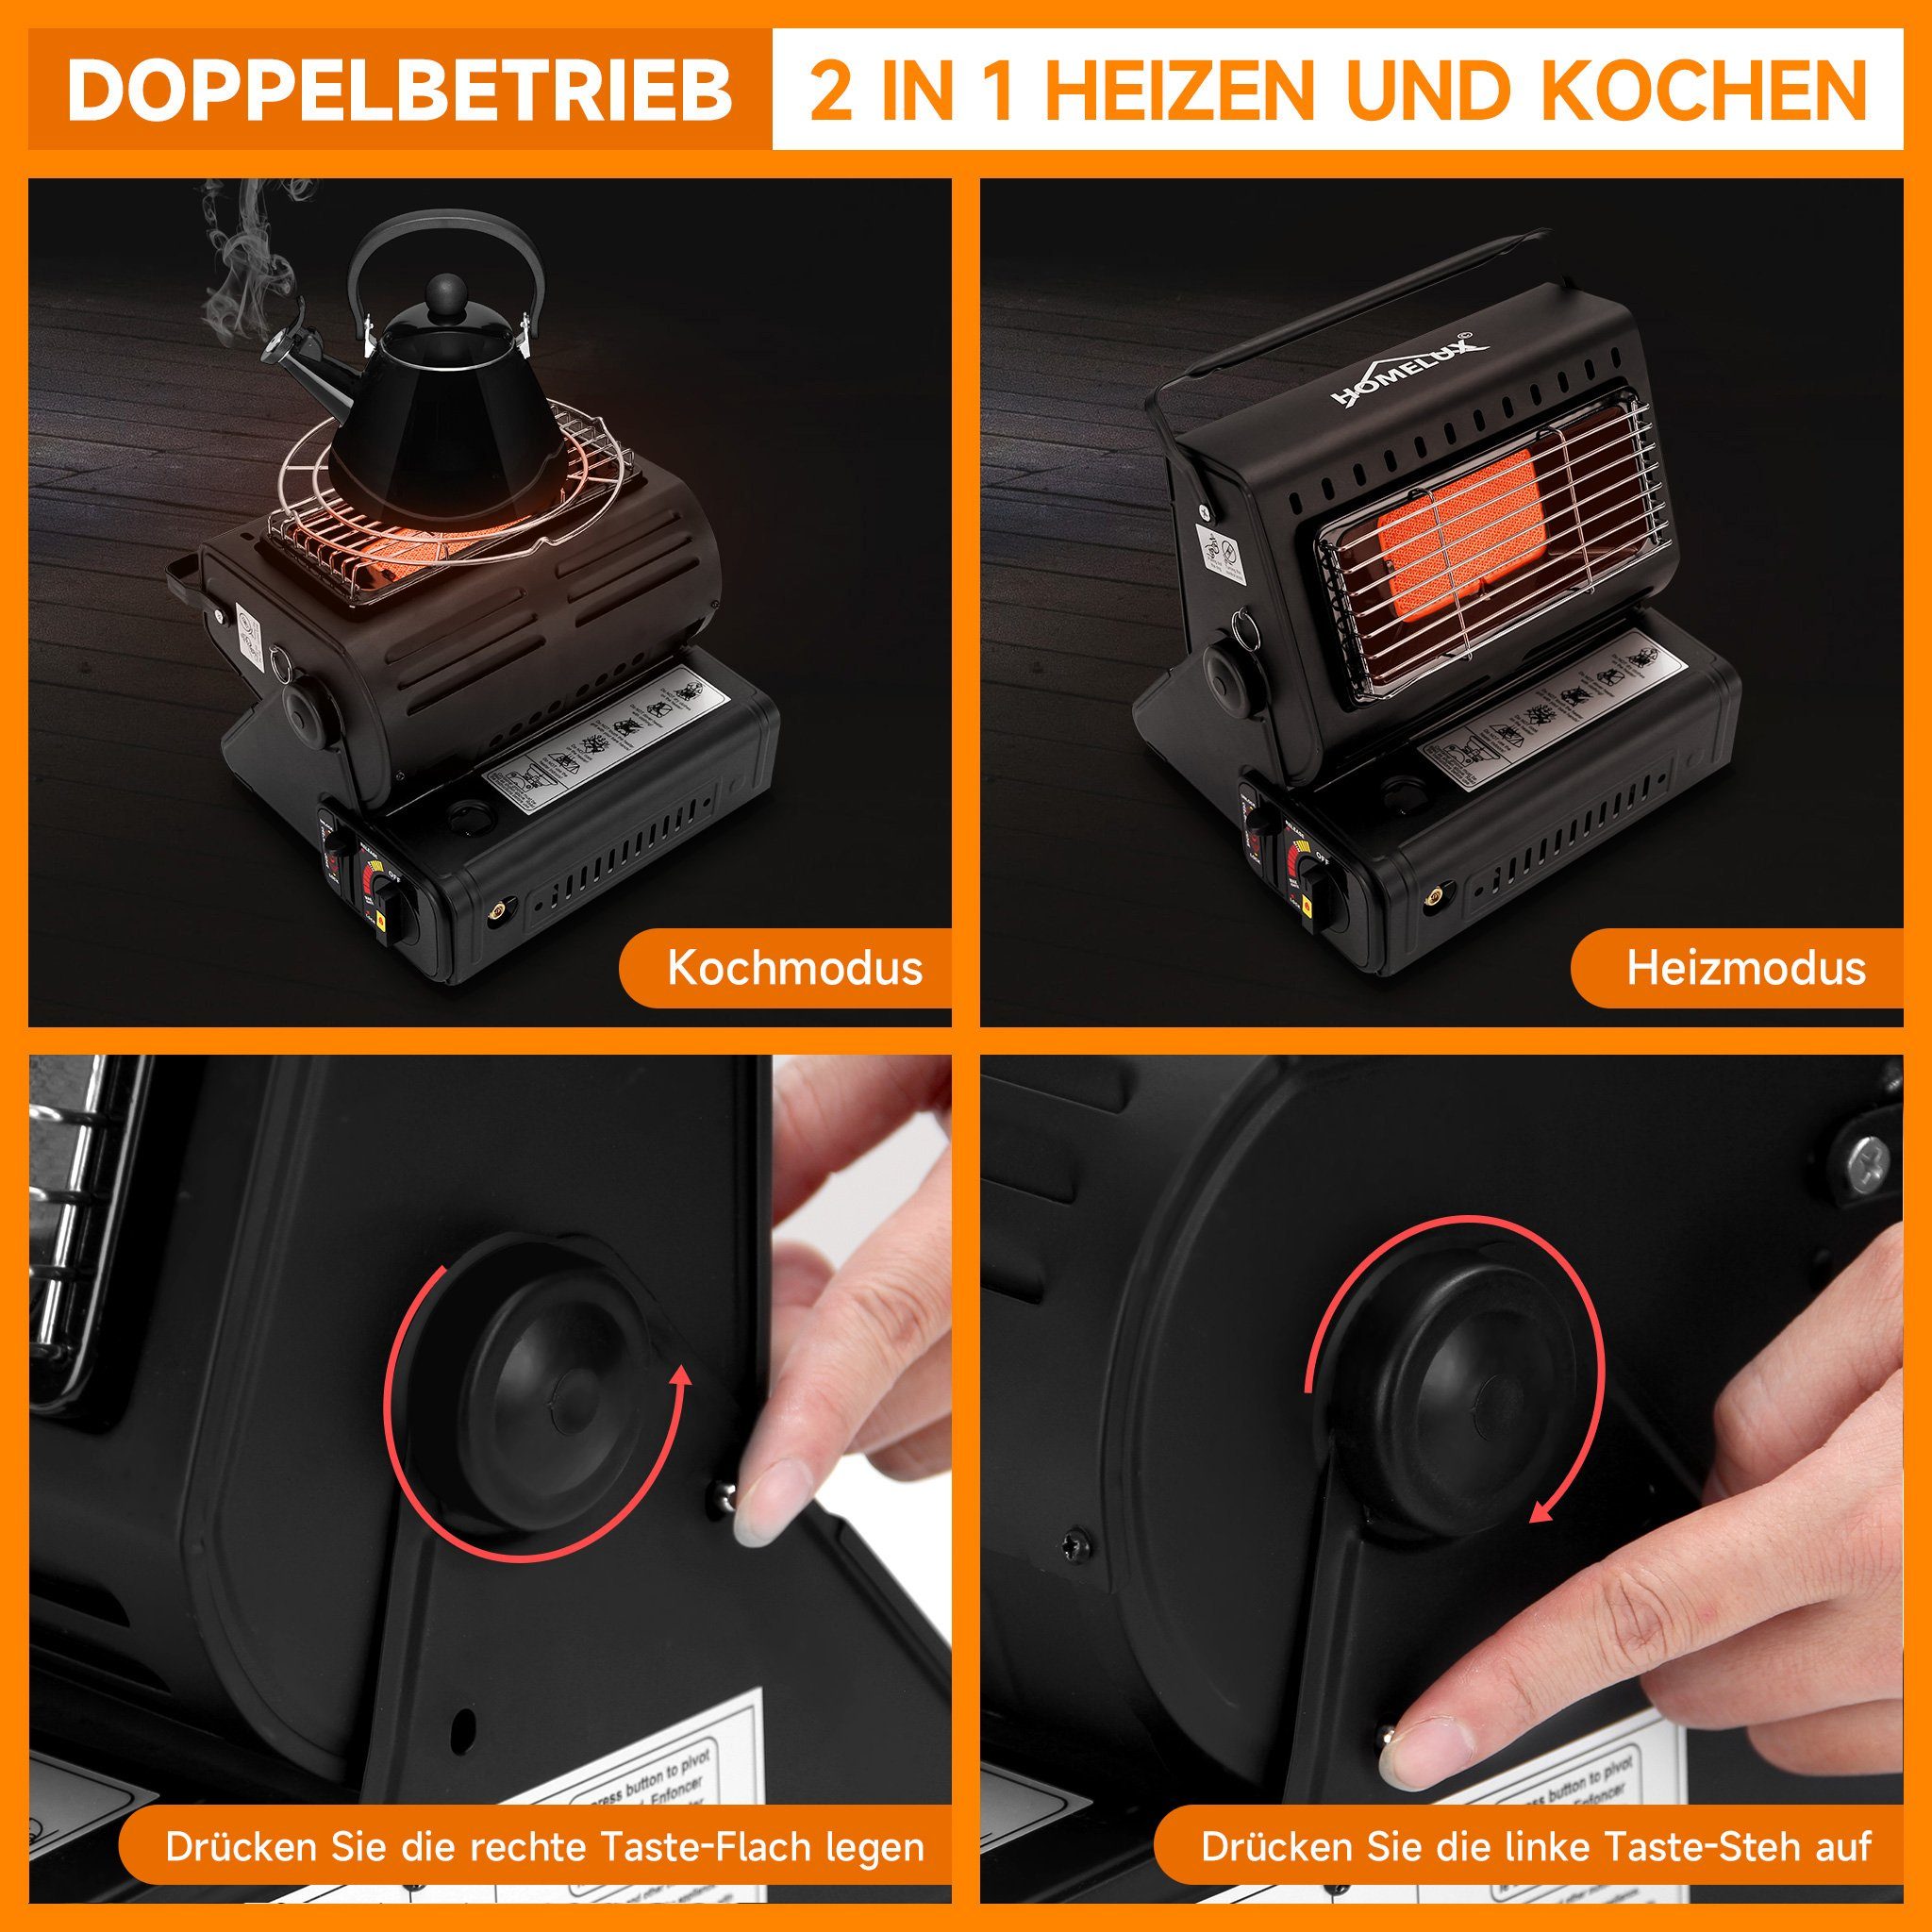 HOMELUX Heizstrahler 1700W 2in1 Tragbare Gasheizstrahler Strom, Gasheizung Camping, Heizung Gasheizer, Gasheizung innenräume Gasheizung, für Outdoor, Ohne 1700 W